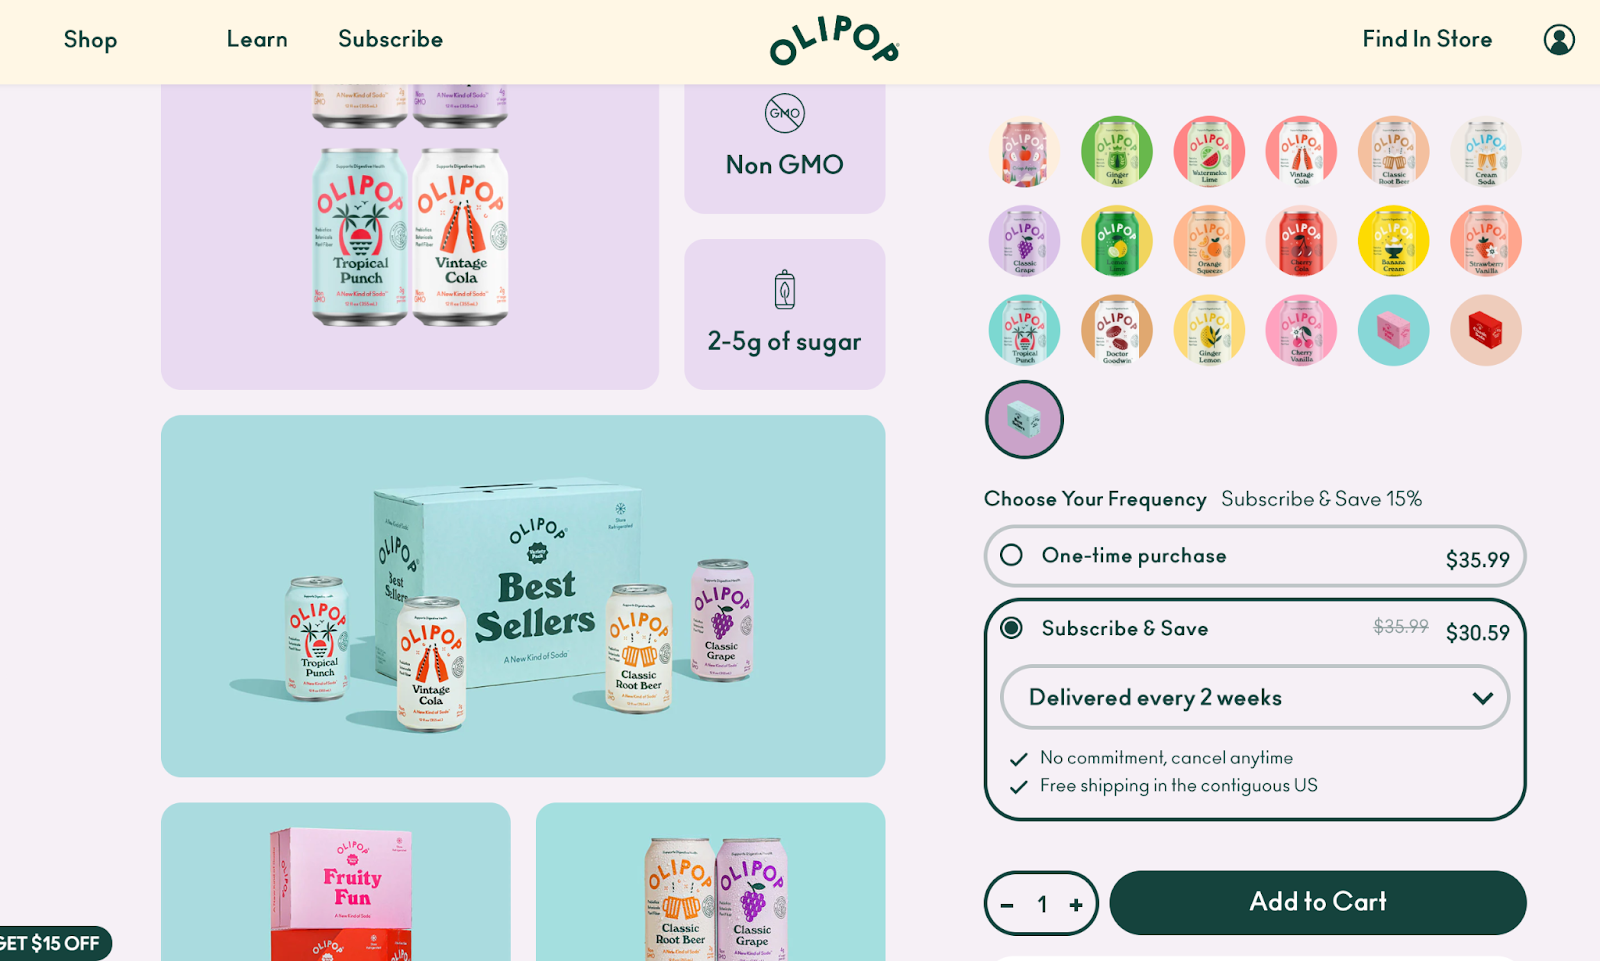 Screenshot of Olipop's product bundle landing page where users can select flavors and if they want to subscribe and save.